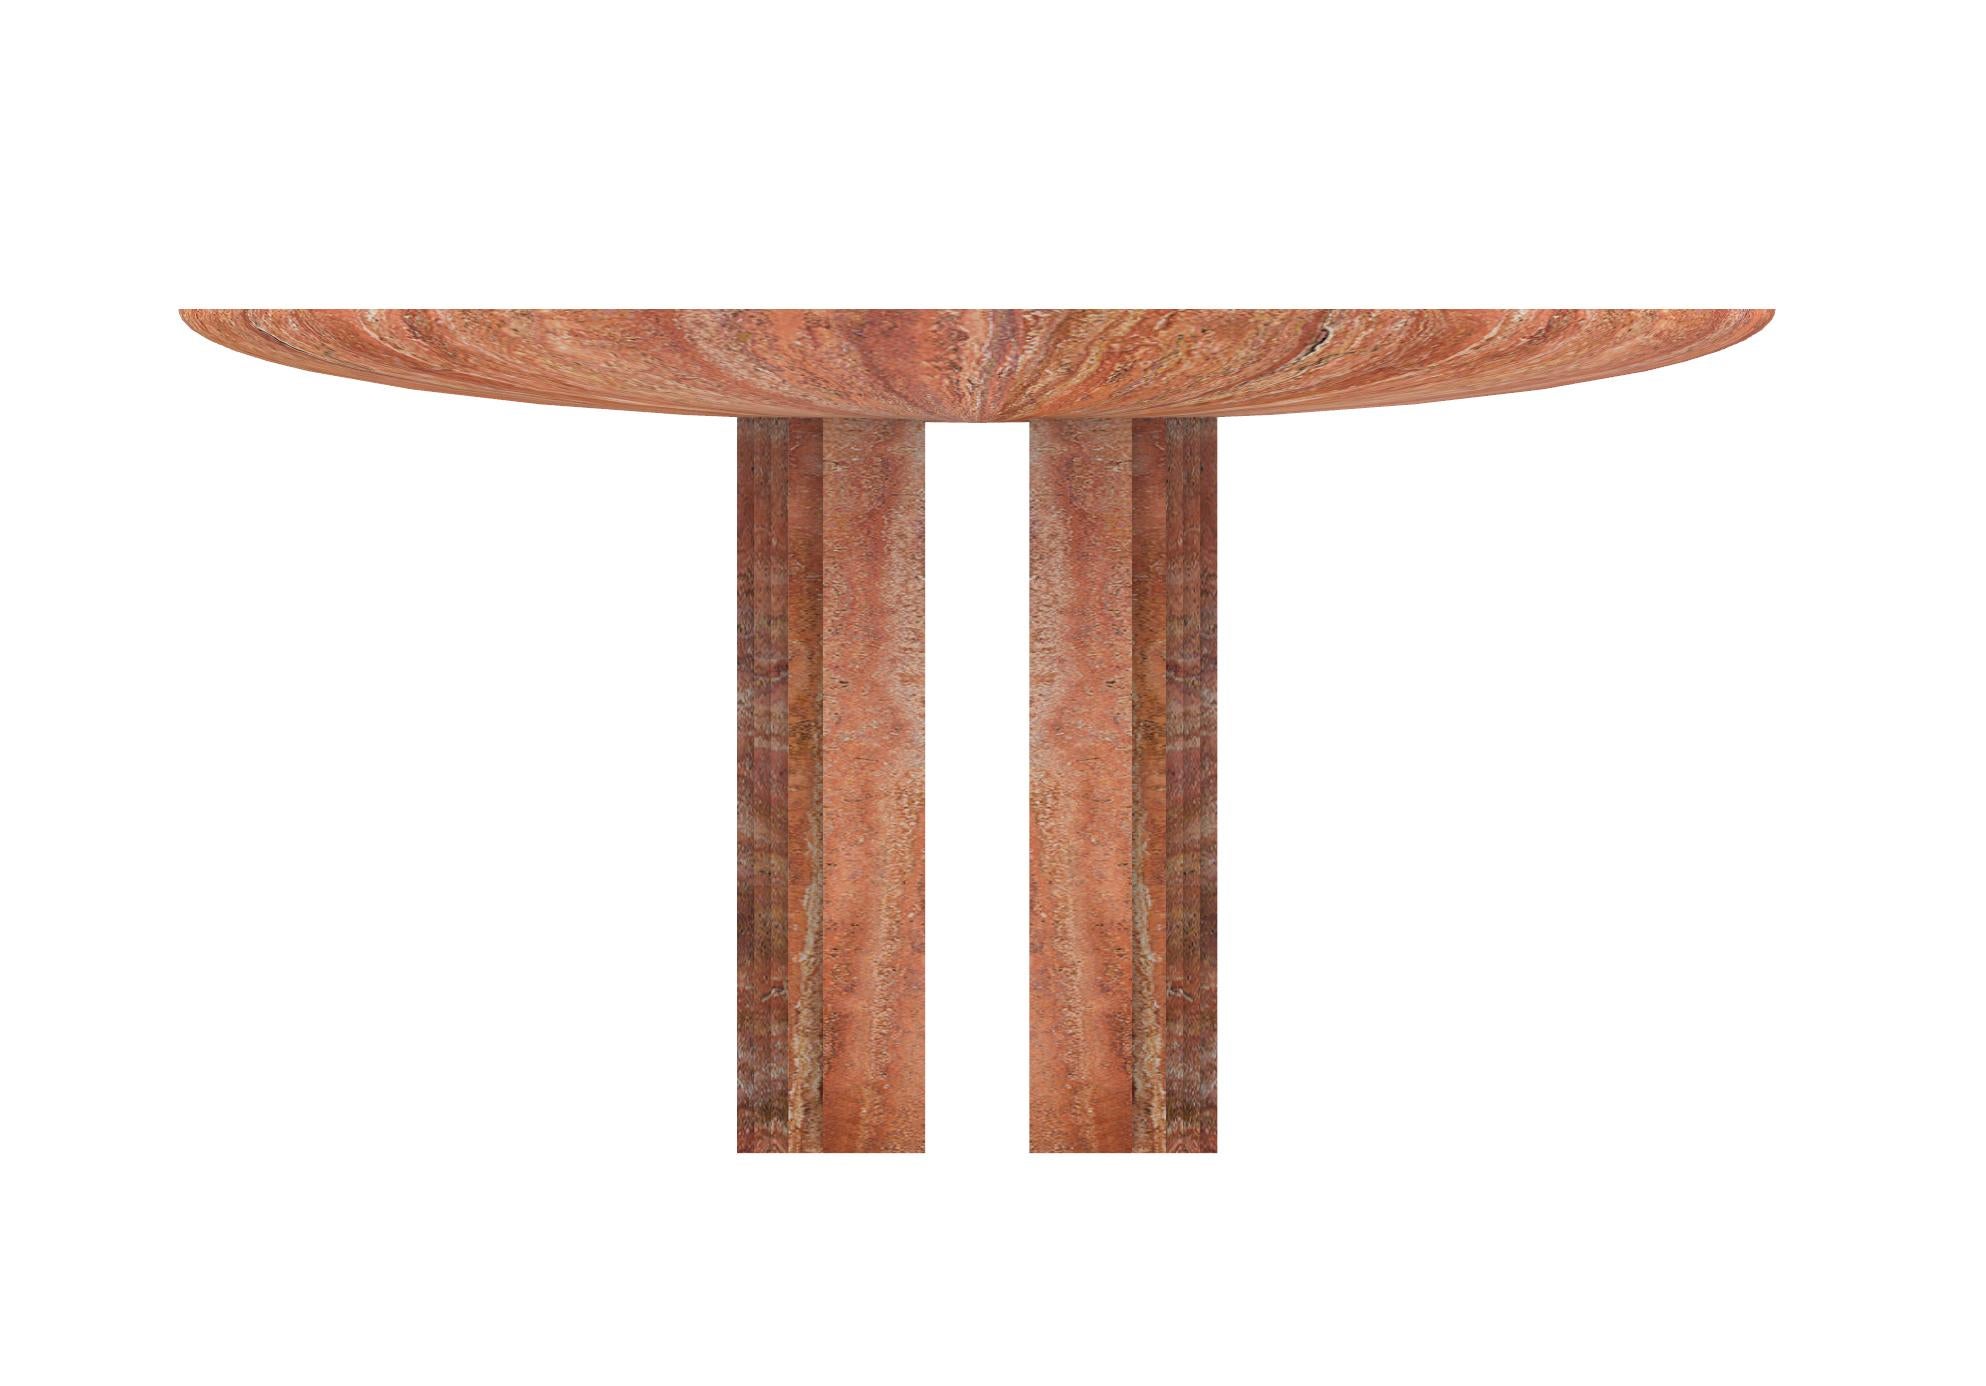 Bulgarian Dining table 0024c in Travertine Red by artist Desia Ava For Sale